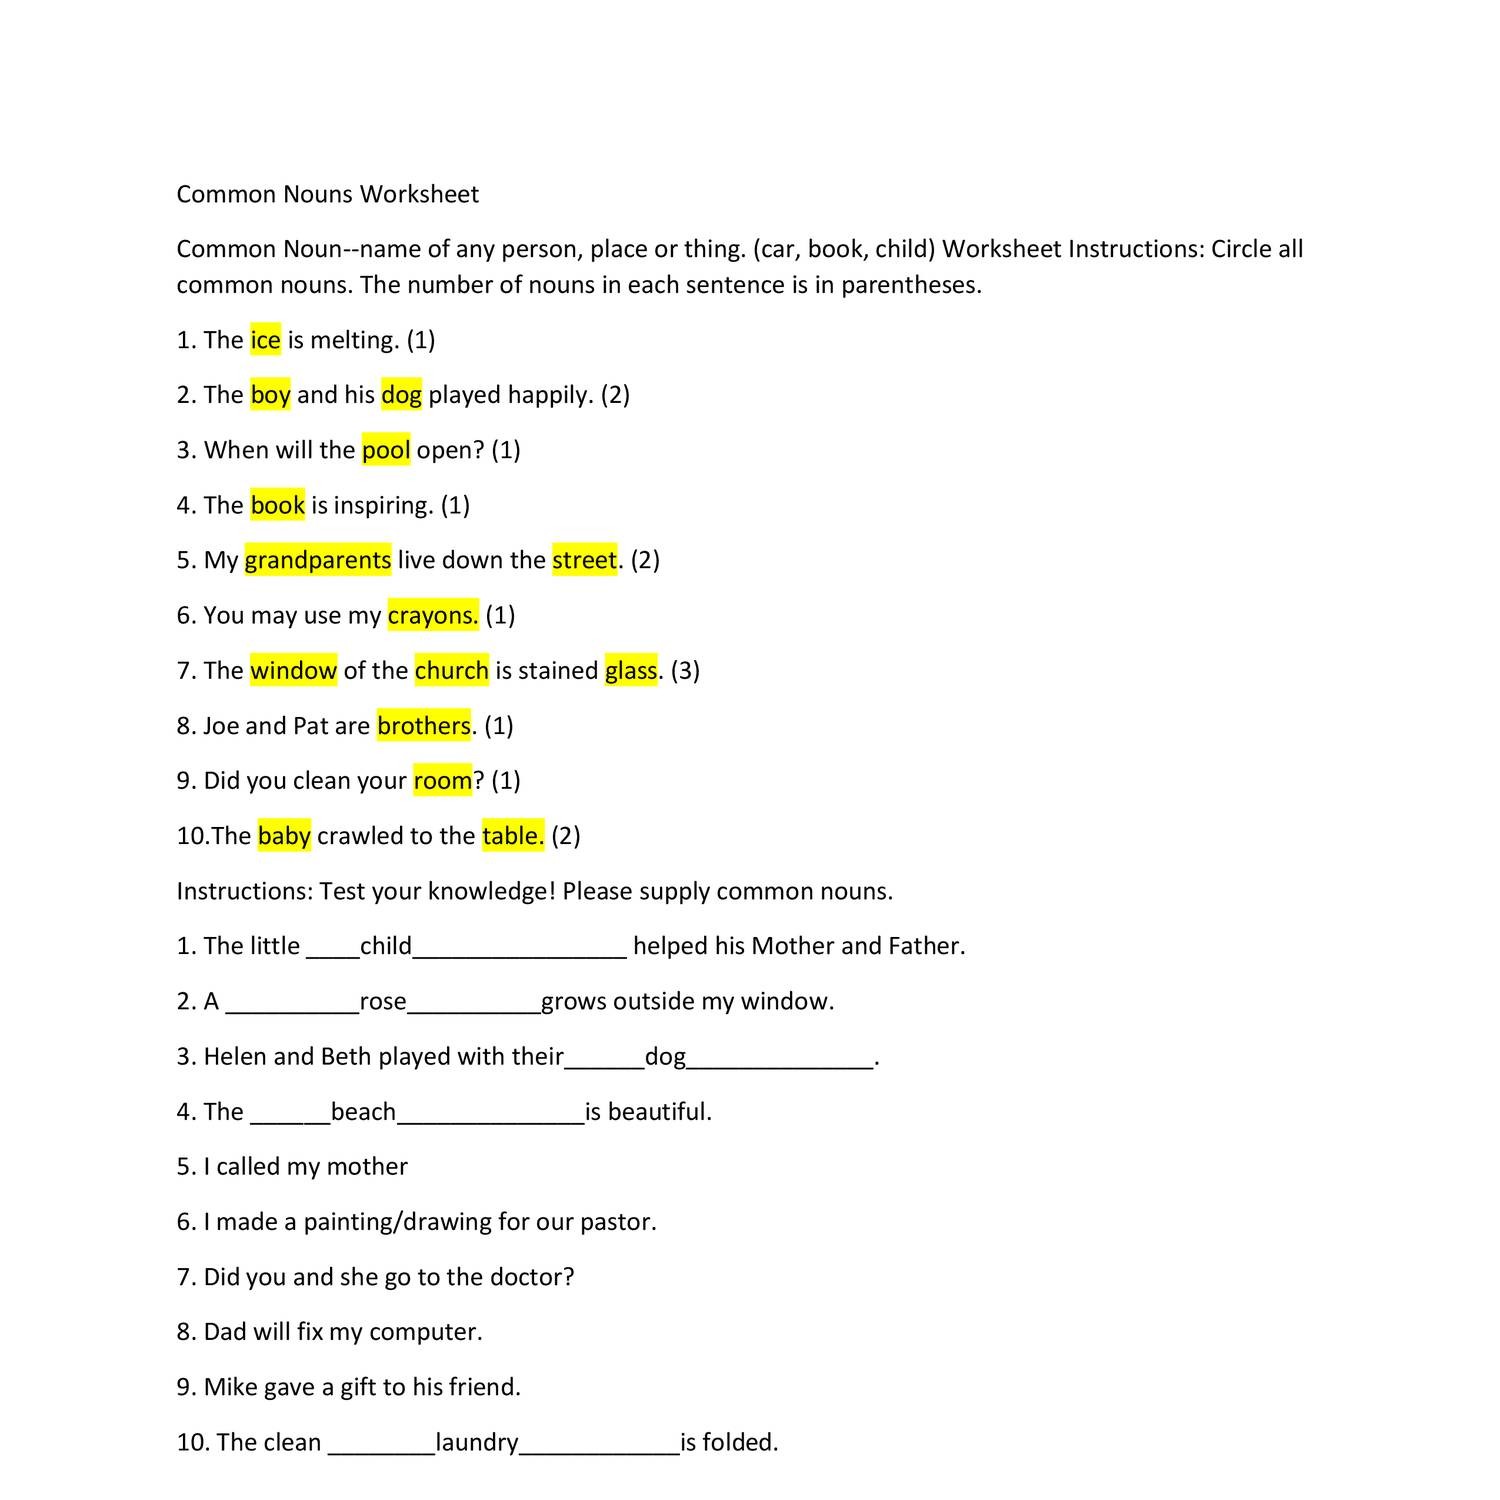 Common Nouns Worksheet answers docx DocDroid